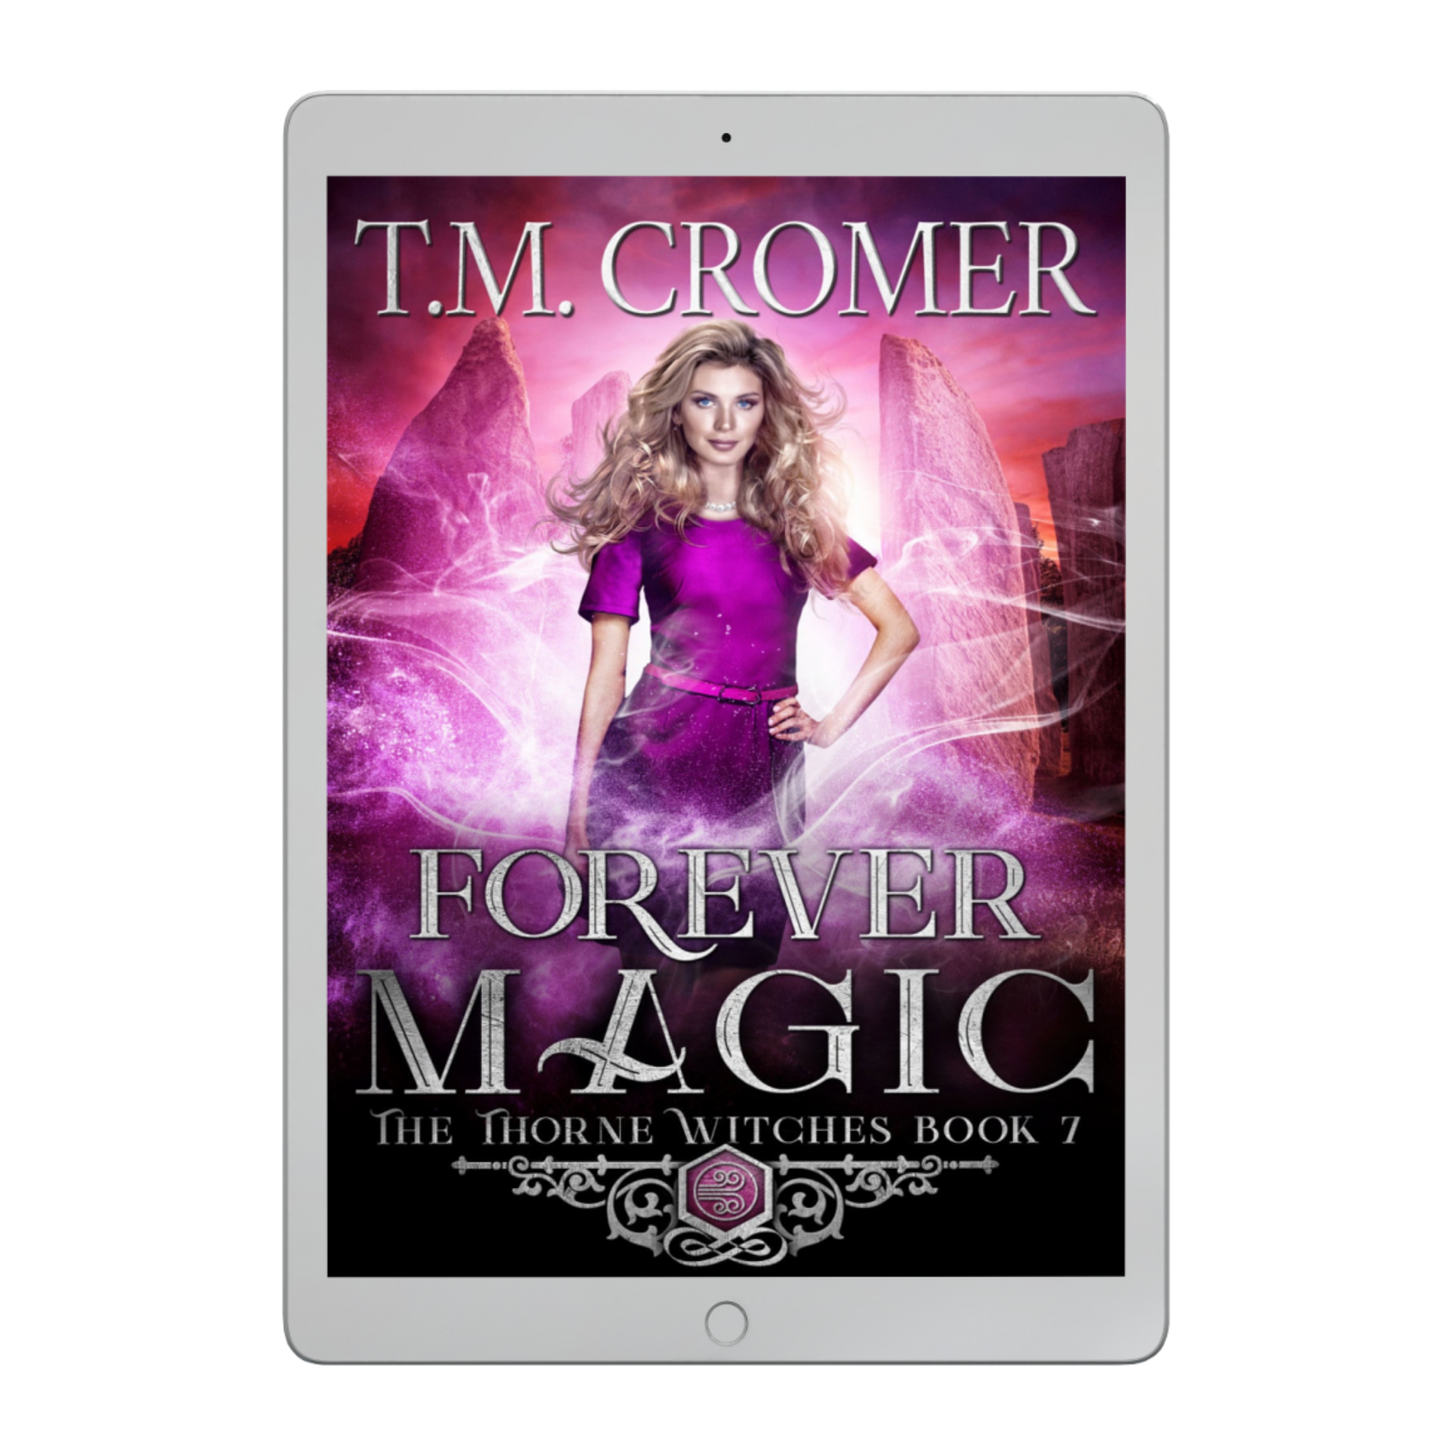 Forever Magic Ebook The Thorne Witches #7, Paranormal Romance, Urban Fantasy, Magical Realism